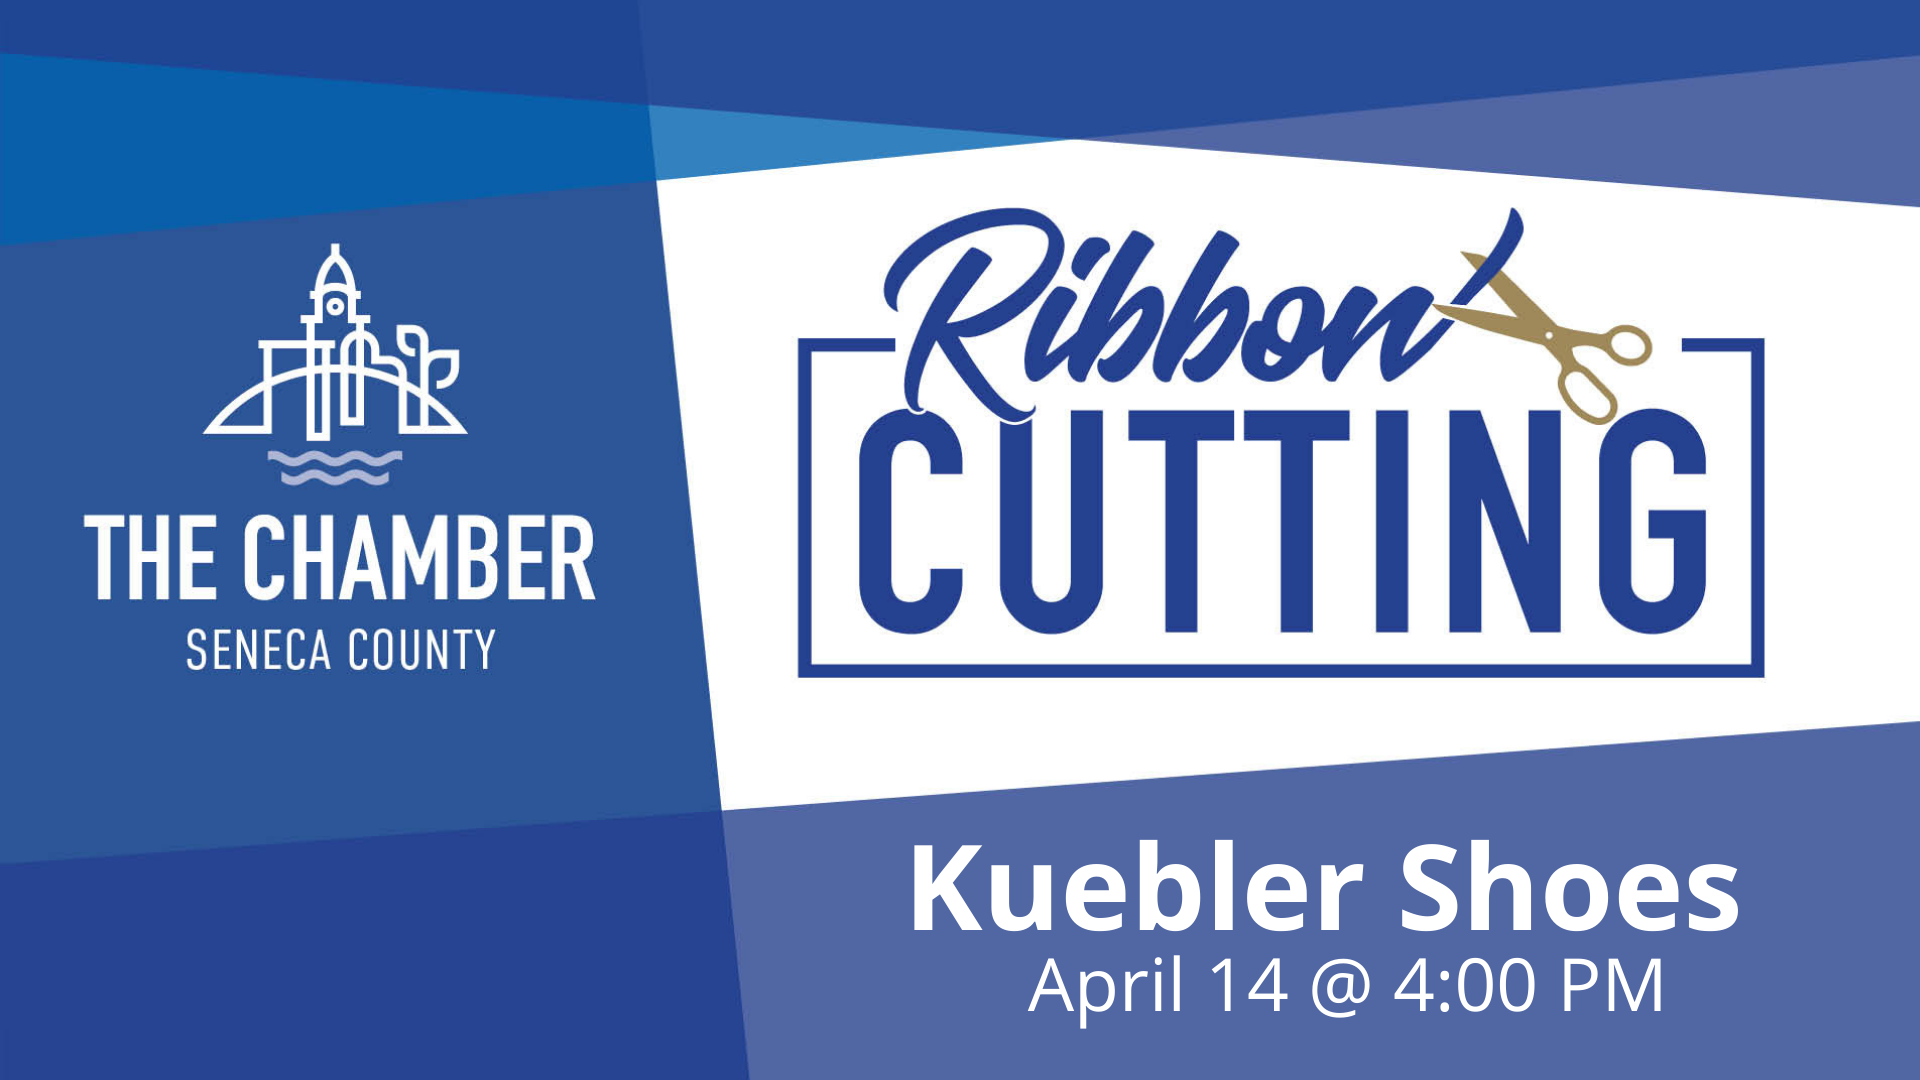 Kuebler Shoes Set to Cut Ribbon on New Ownership and Location